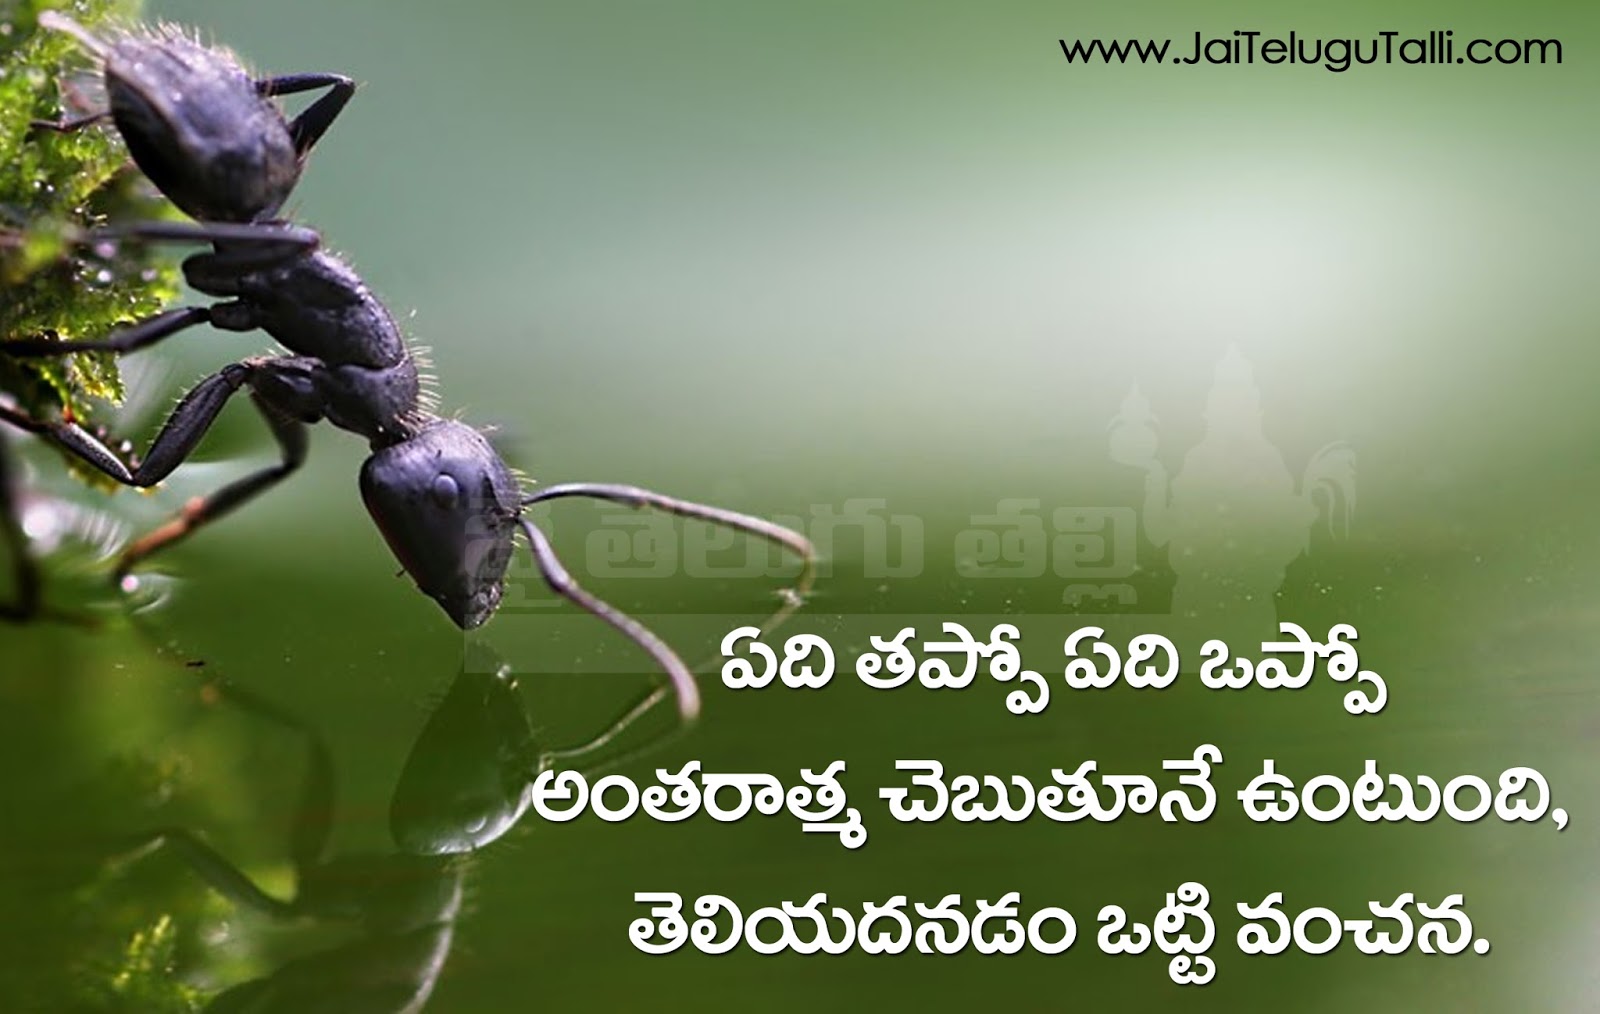 Telugu Life Inspirational Quotes With Hd Wallpapers Www